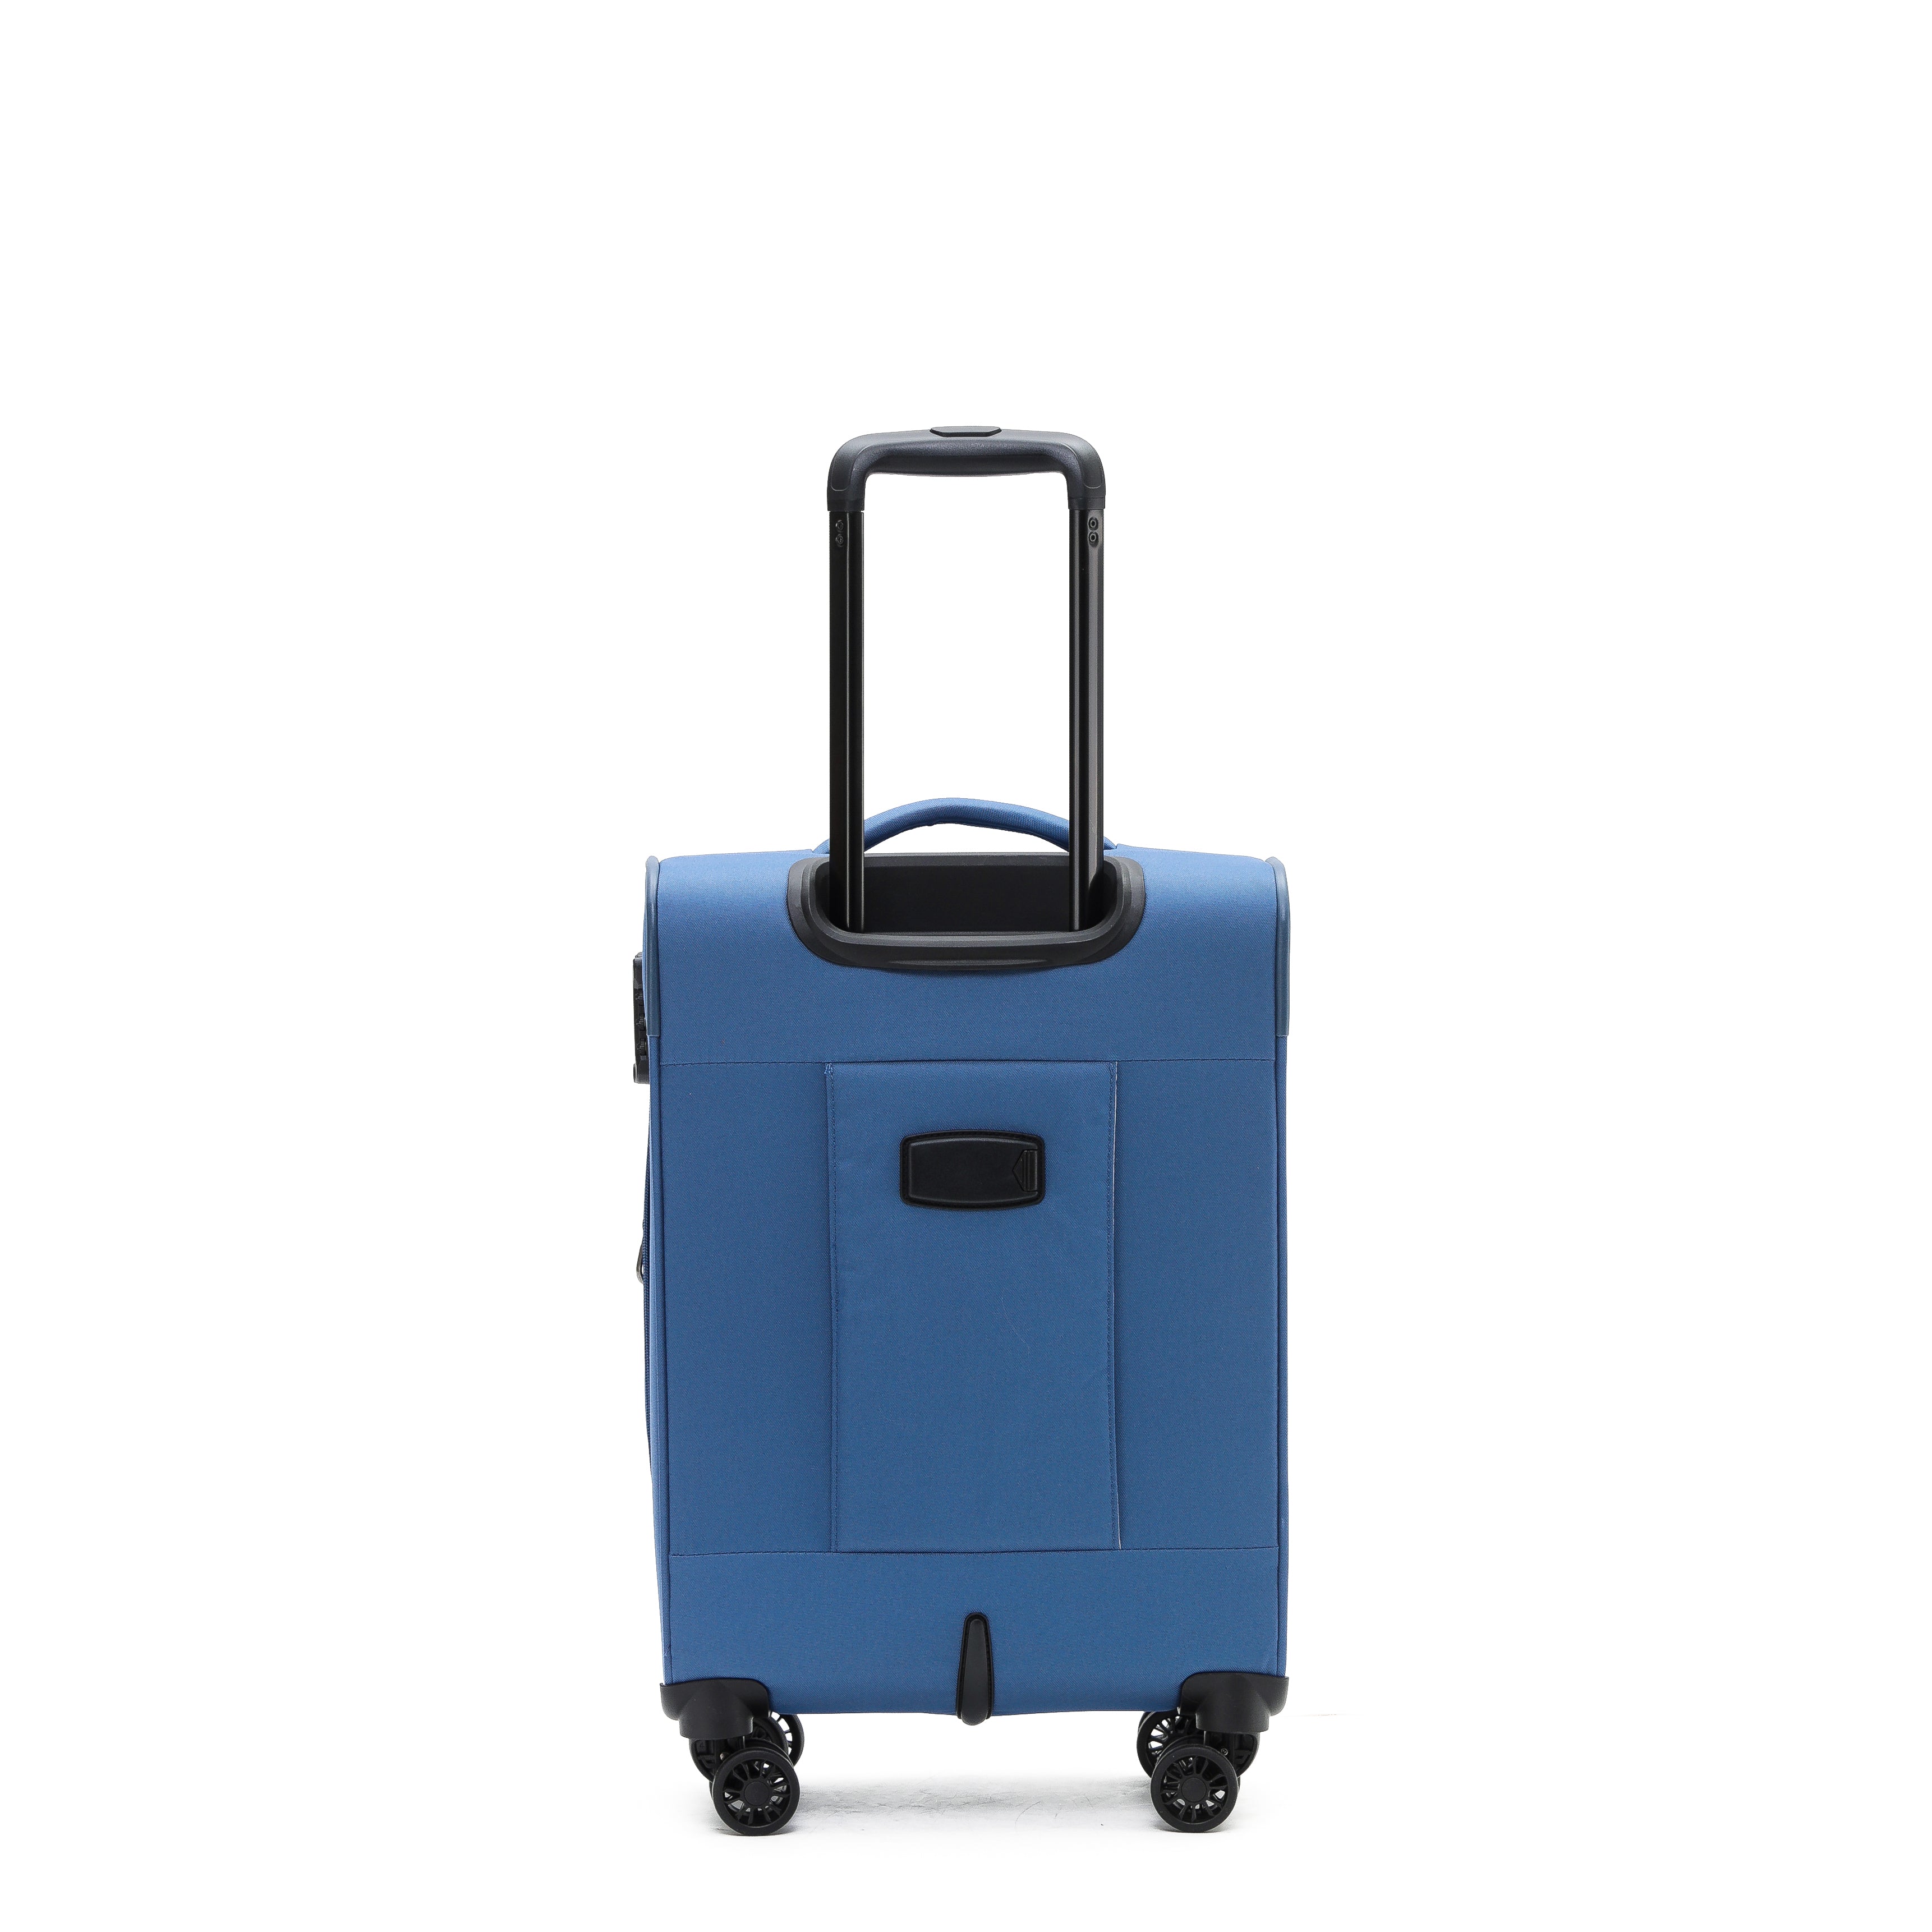 Tosca - Aviator 2.0 set of 3 suitcases (L-M-S) - Blue-7